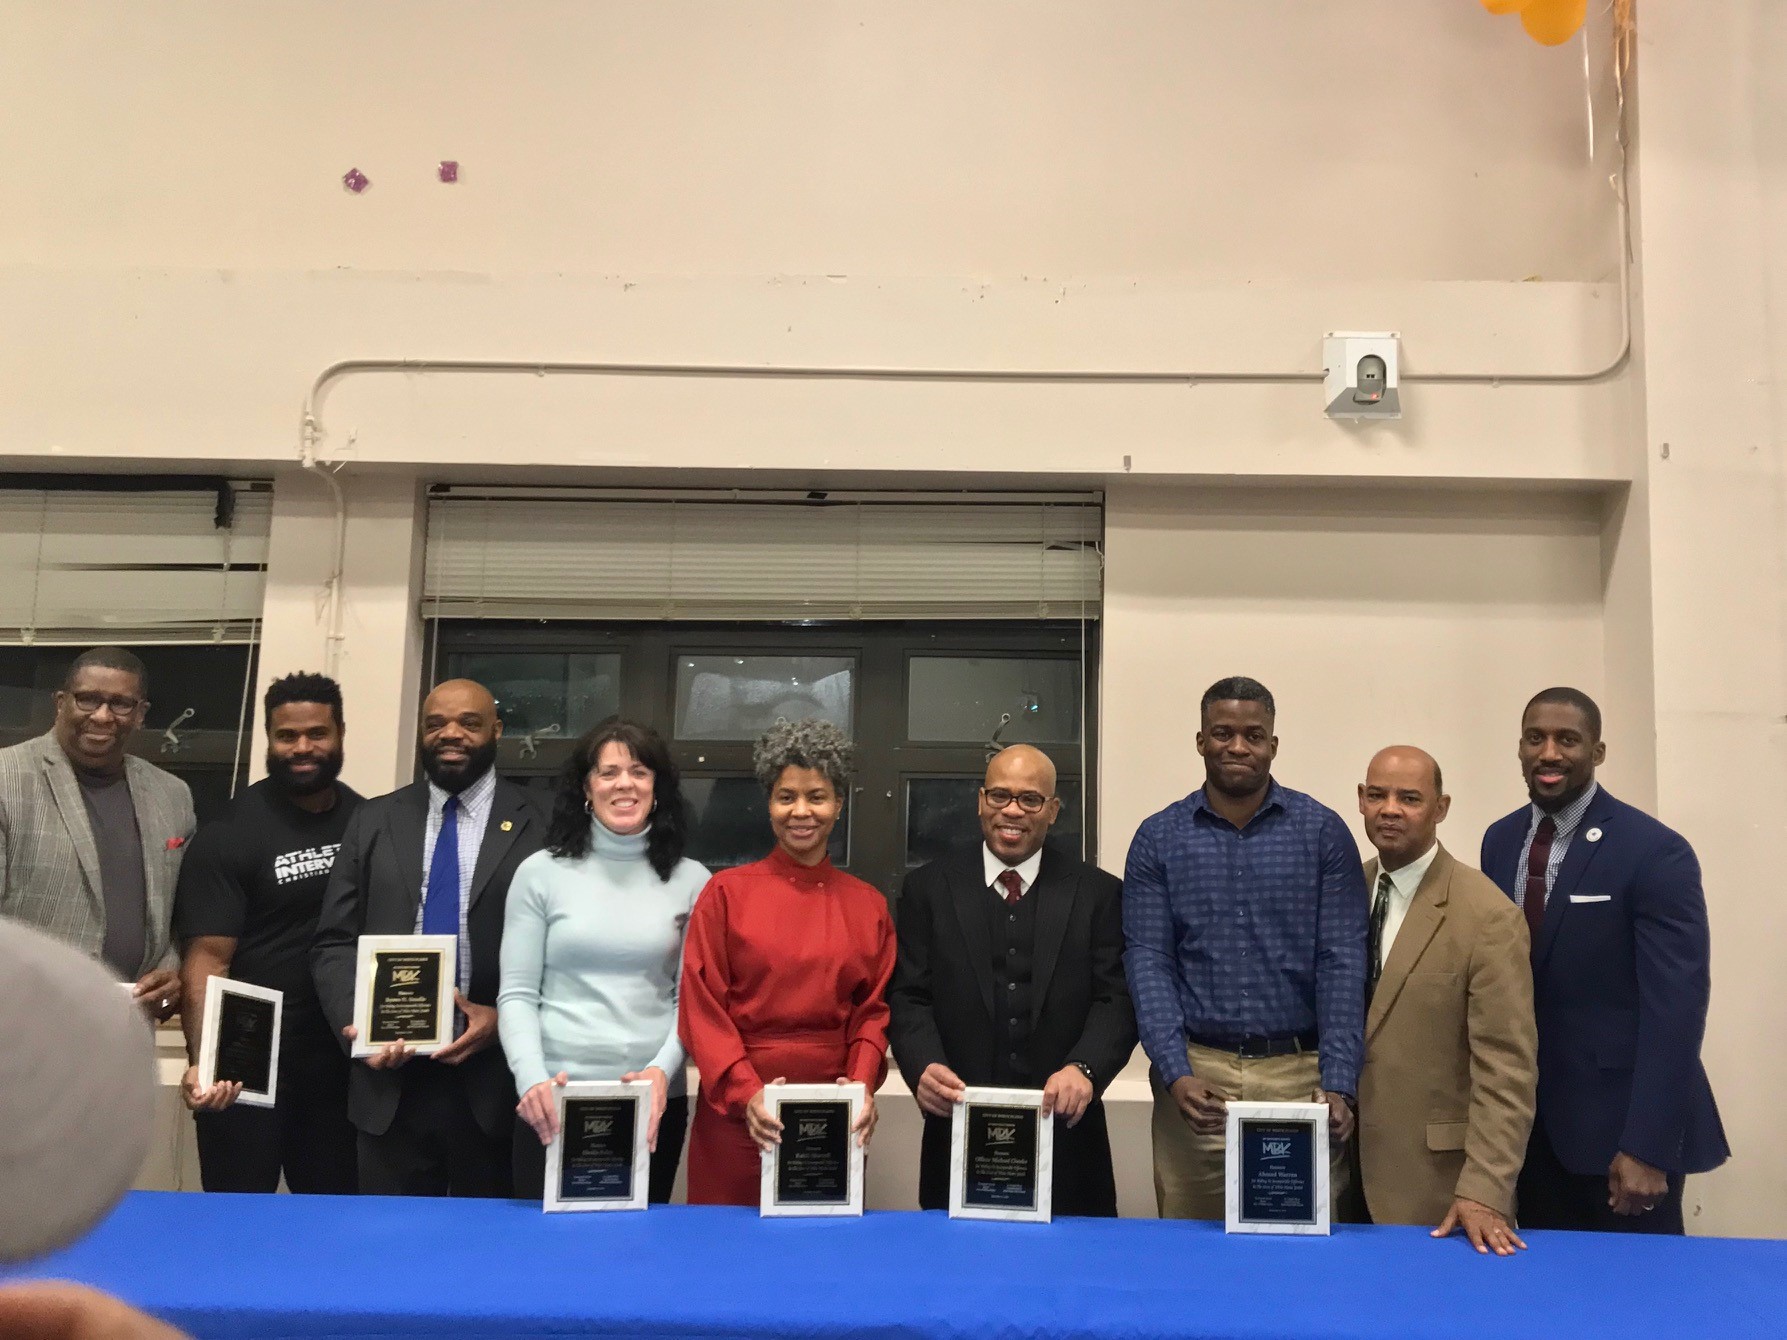 Honorees at the White Plains second anniversary celebration, Executive Director of the White Plains Youth Bureau Frank Williams, Jr. and NYSED Director of Family and Community Engagement Dr. Don-Lee Applyrs